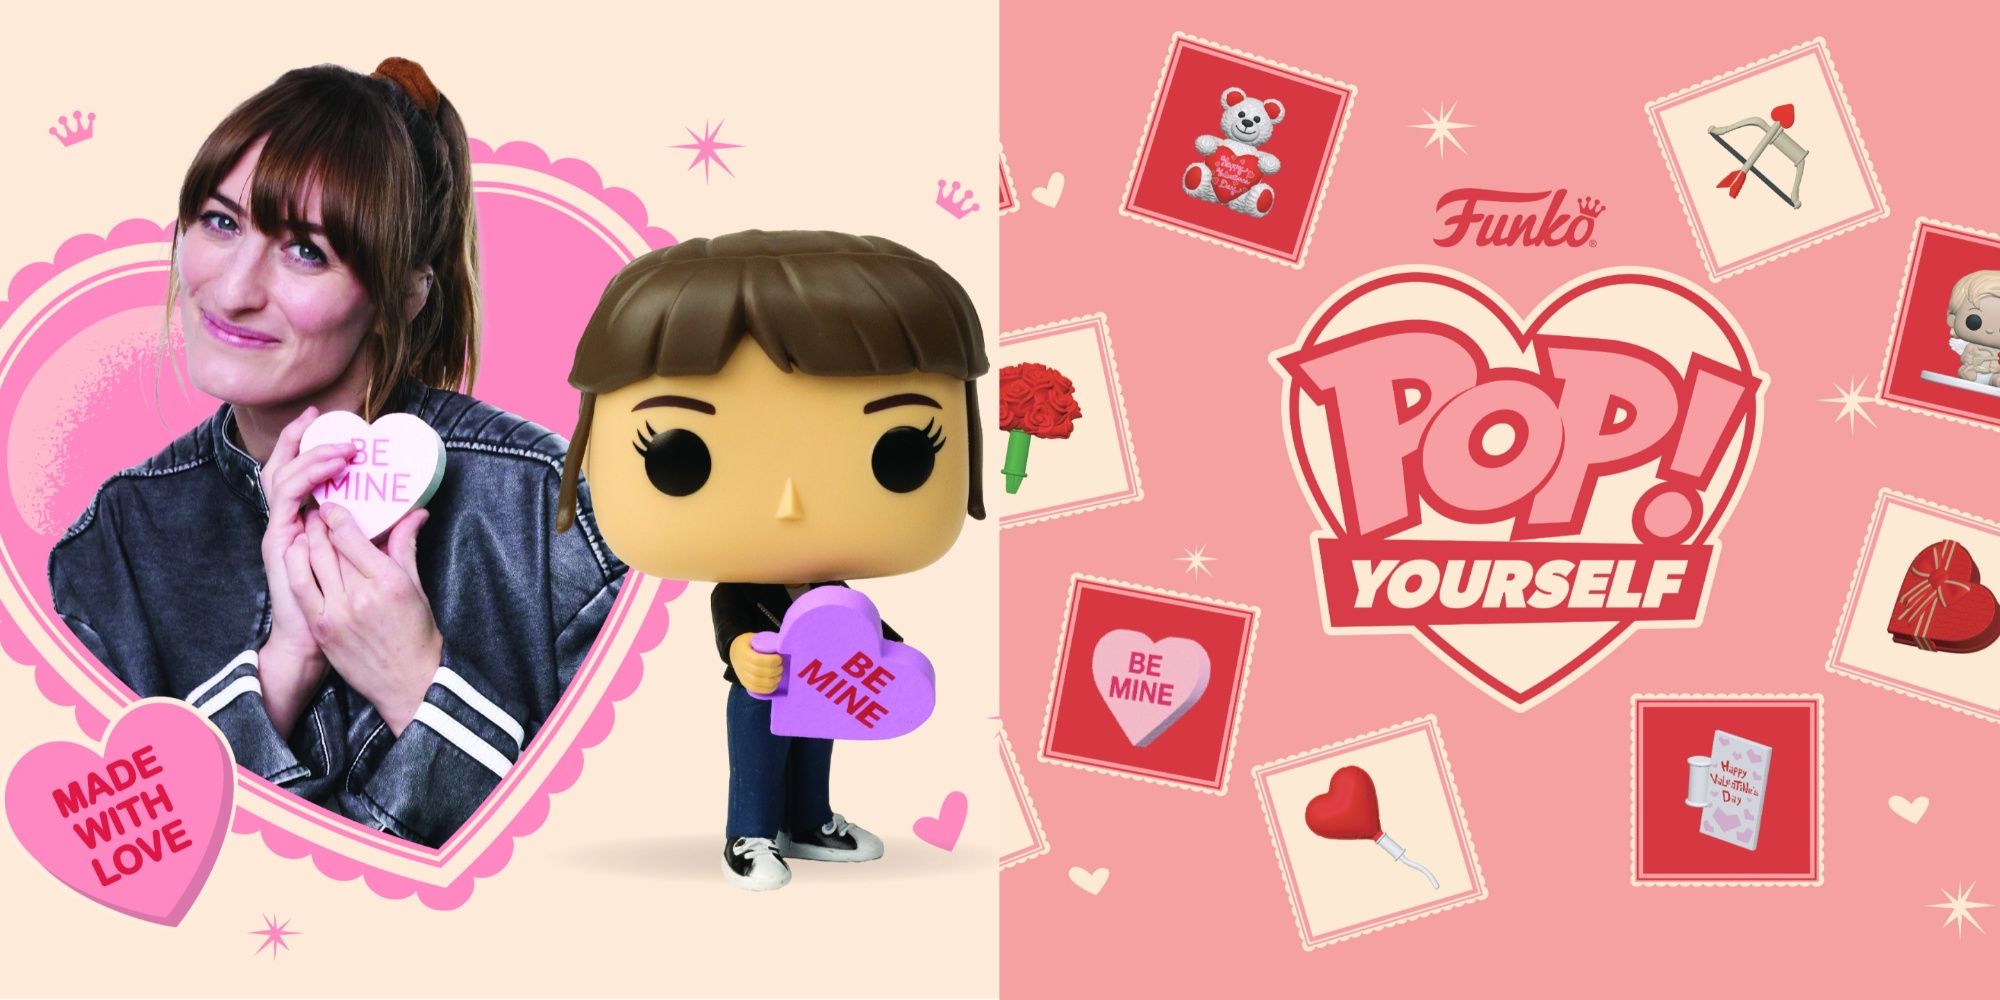 woman with her valentines funko pop yourself figure, and other accessories in the valentine's collection